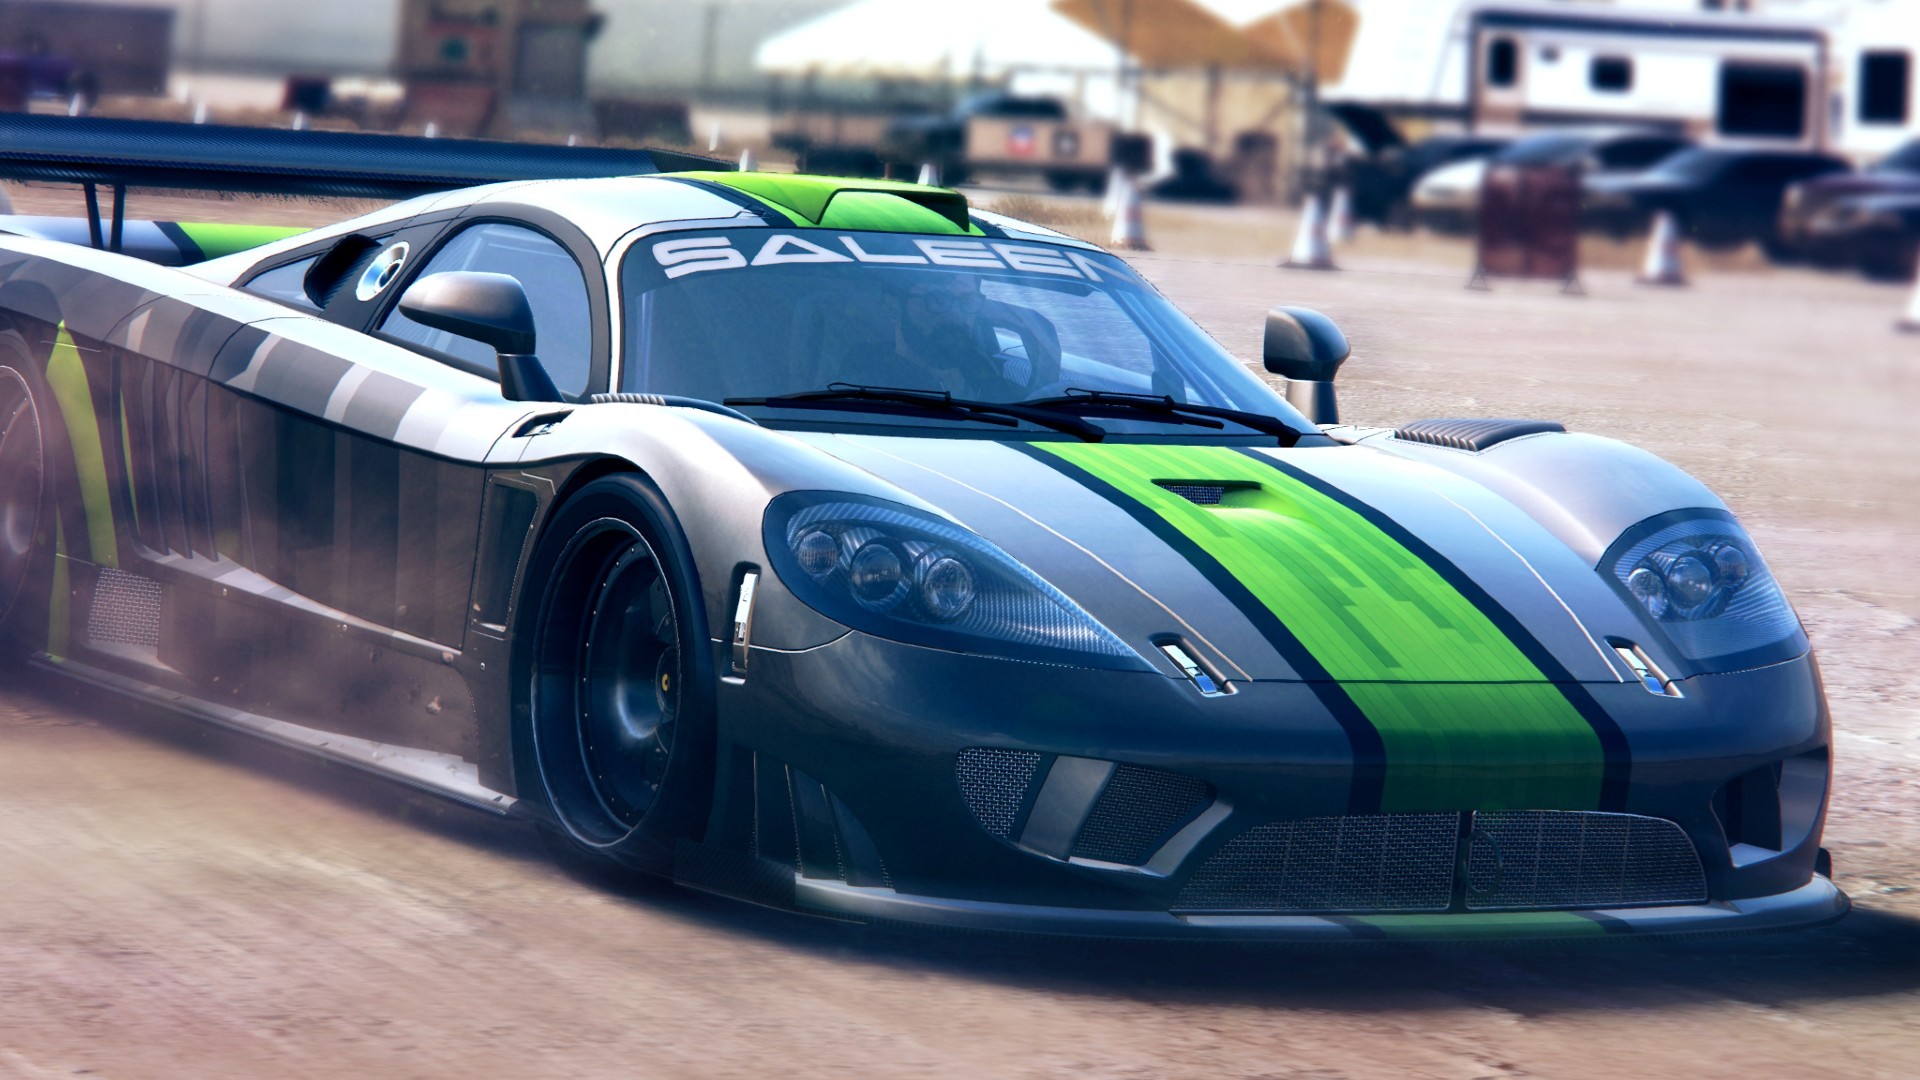 The Crew servers shutdown lawsuit: A sports car from Ubisoft racing game The Crew